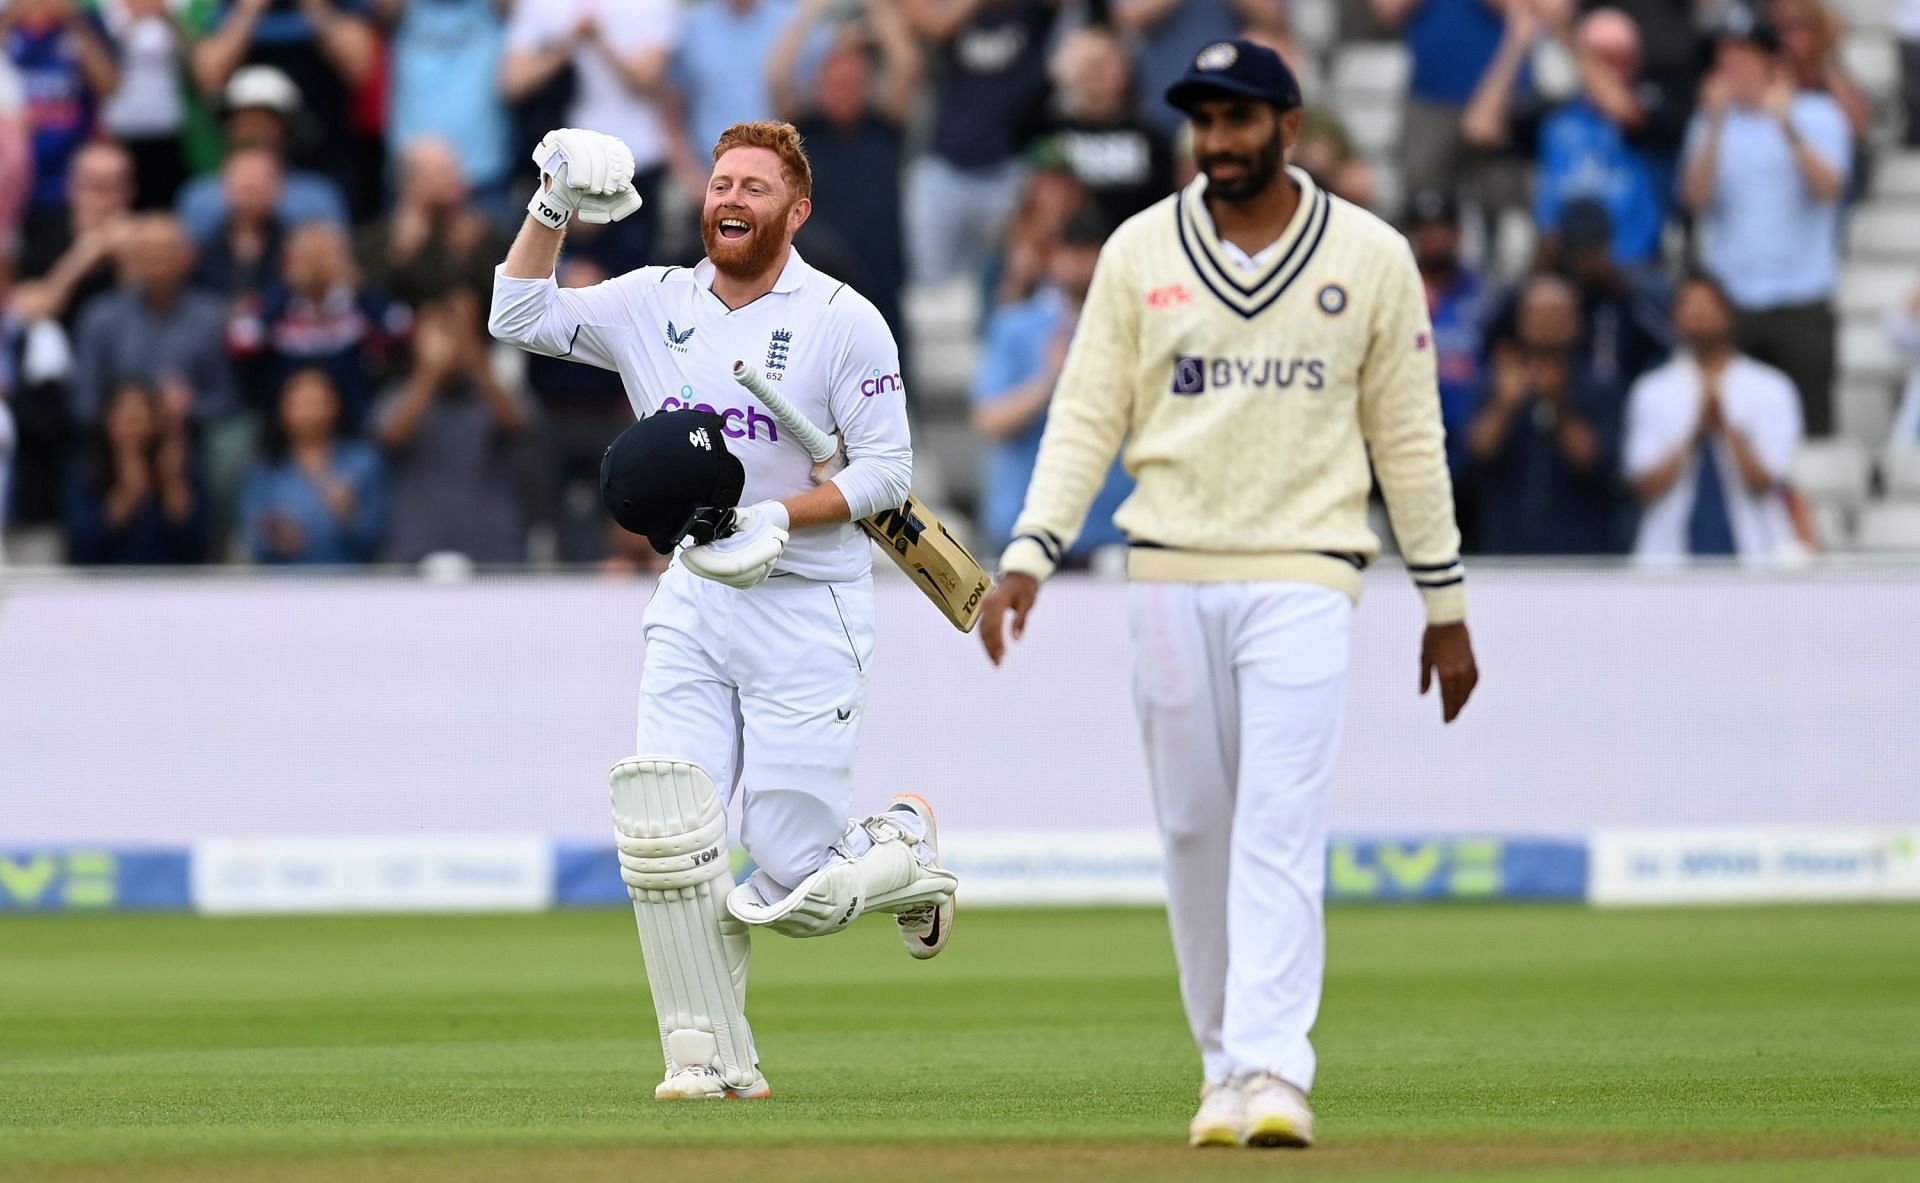 Jonny Bairstow scored hundreds in both innings. Pic: Getty Images